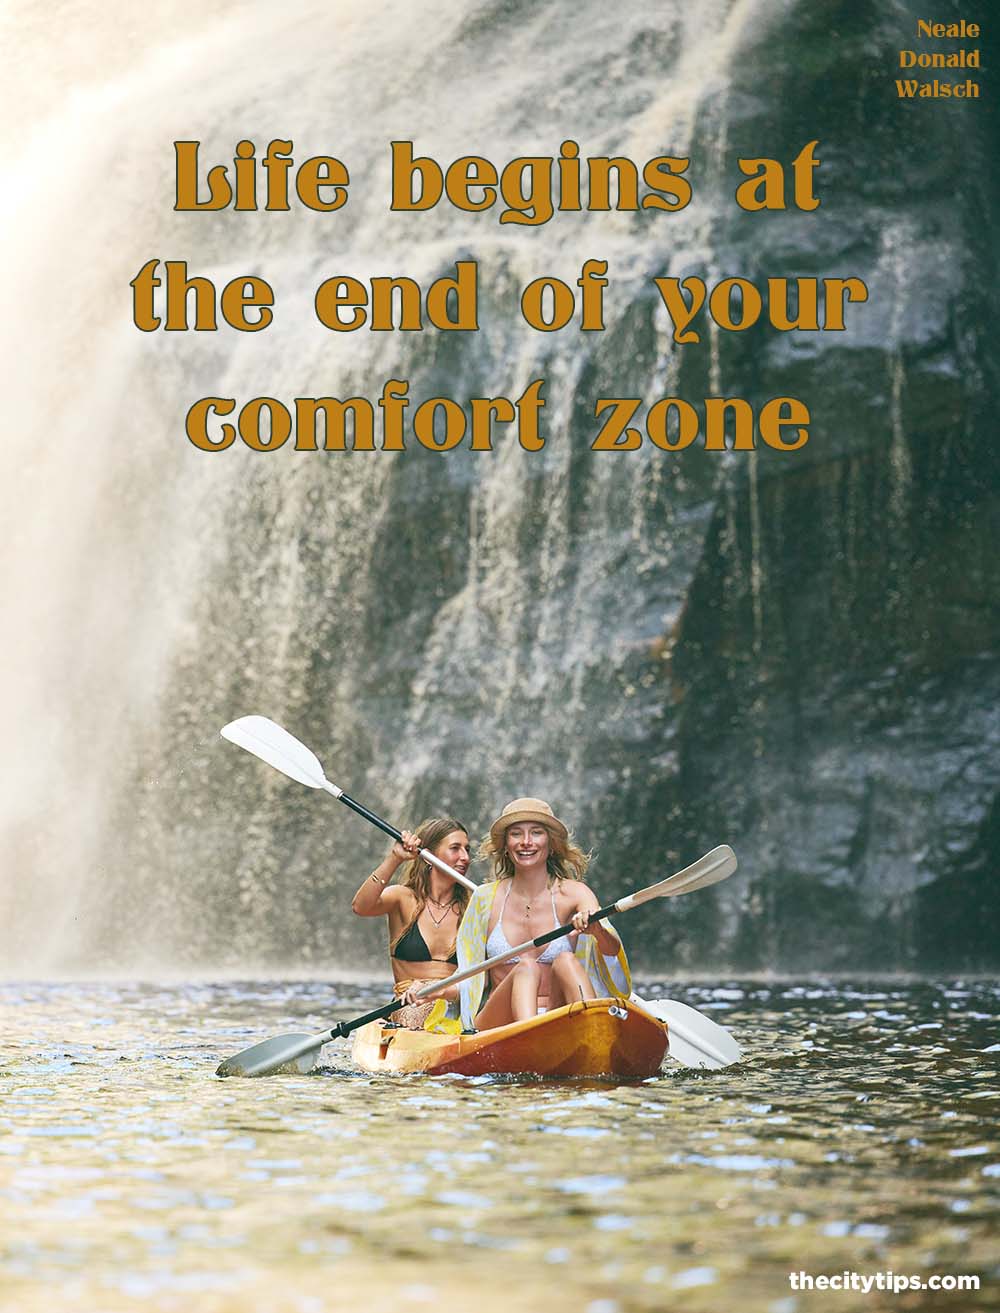 "Life begins at the end of your comfort zone." by Neale Donald Walsch